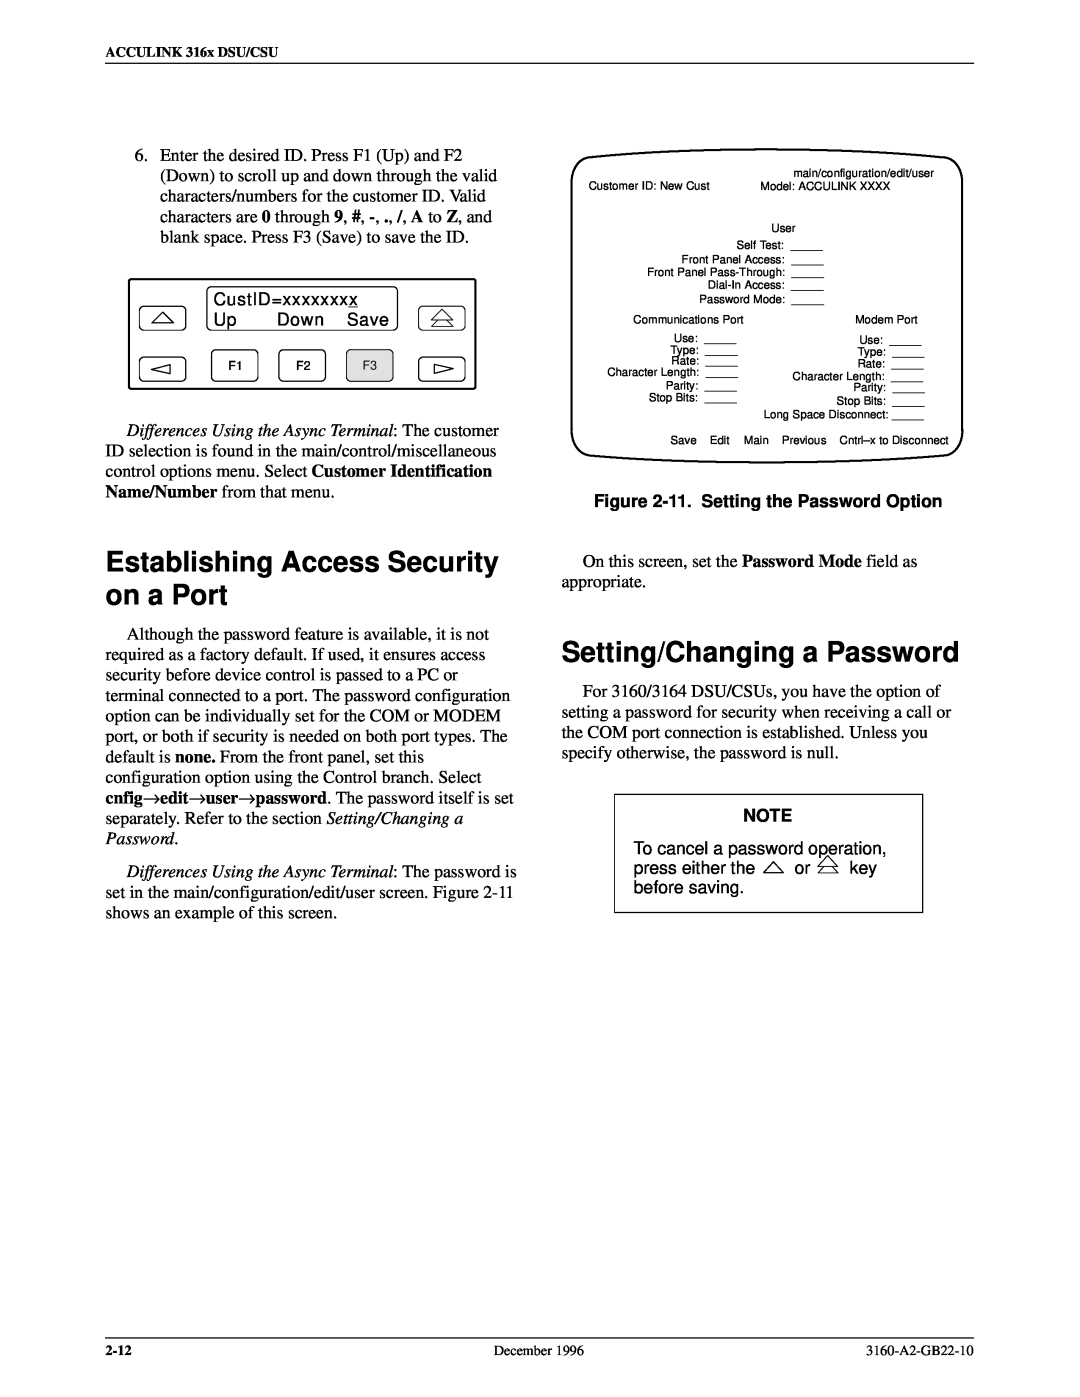 Paradyne 316x manual Establishing Access Security on a Port, Setting/Changing a Password, 11. Setting the Password Option 